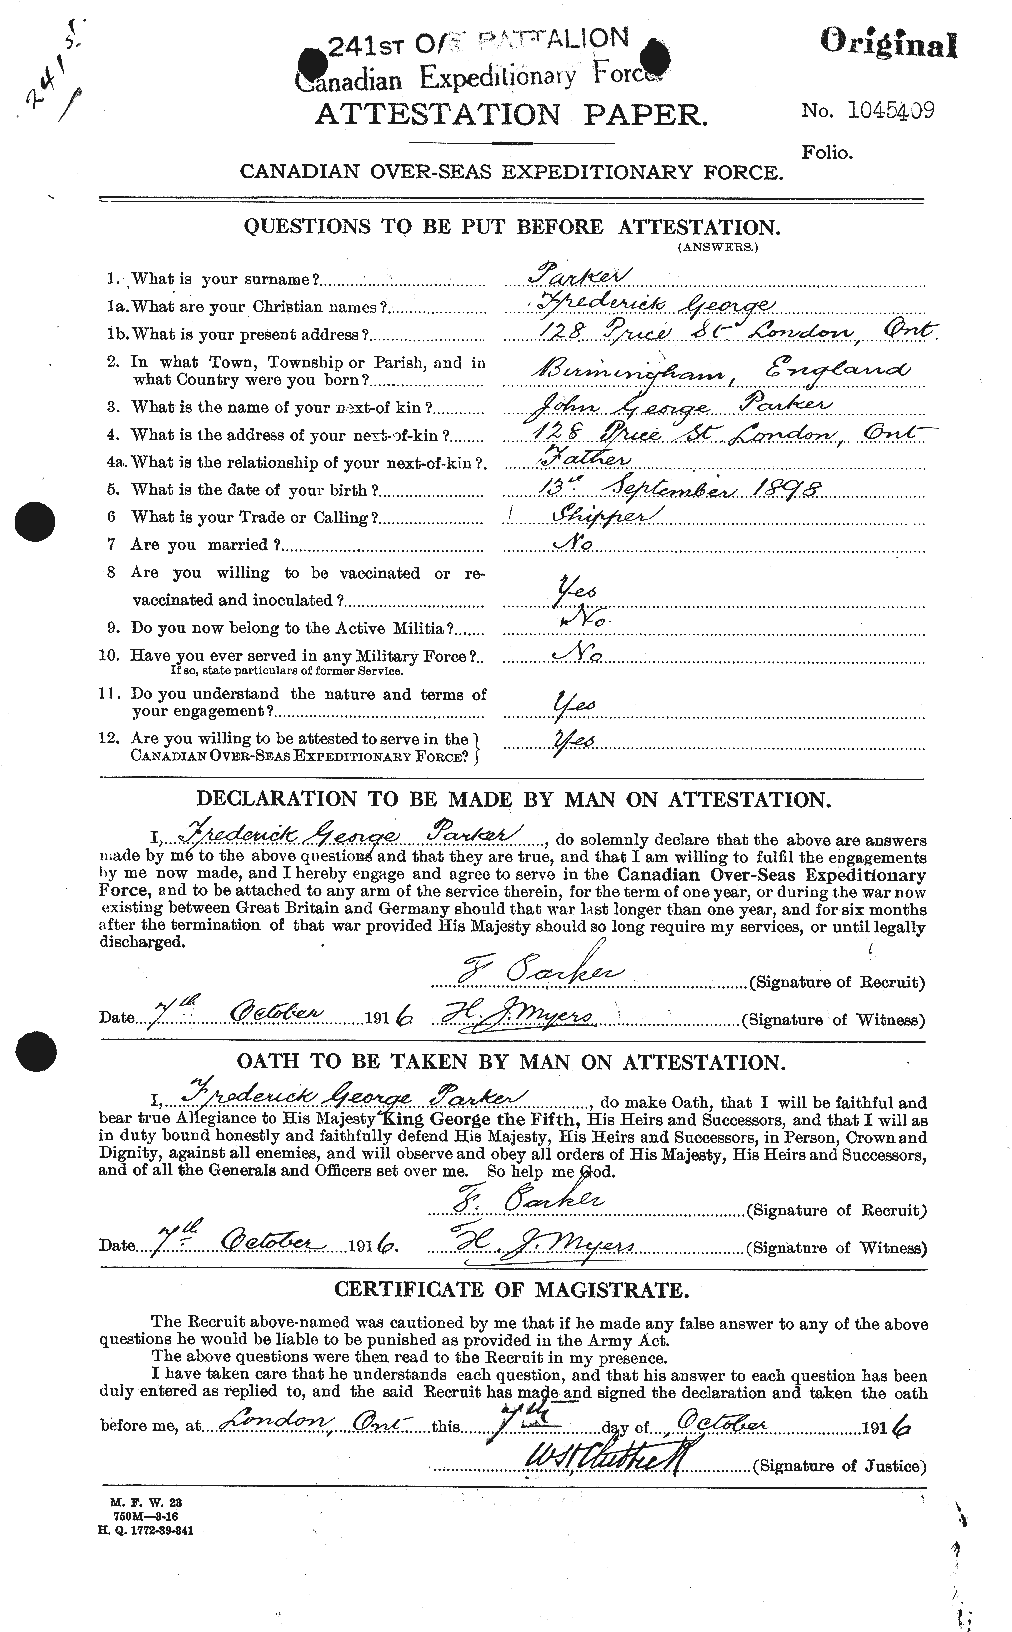 Personnel Records of the First World War - CEF 565214a